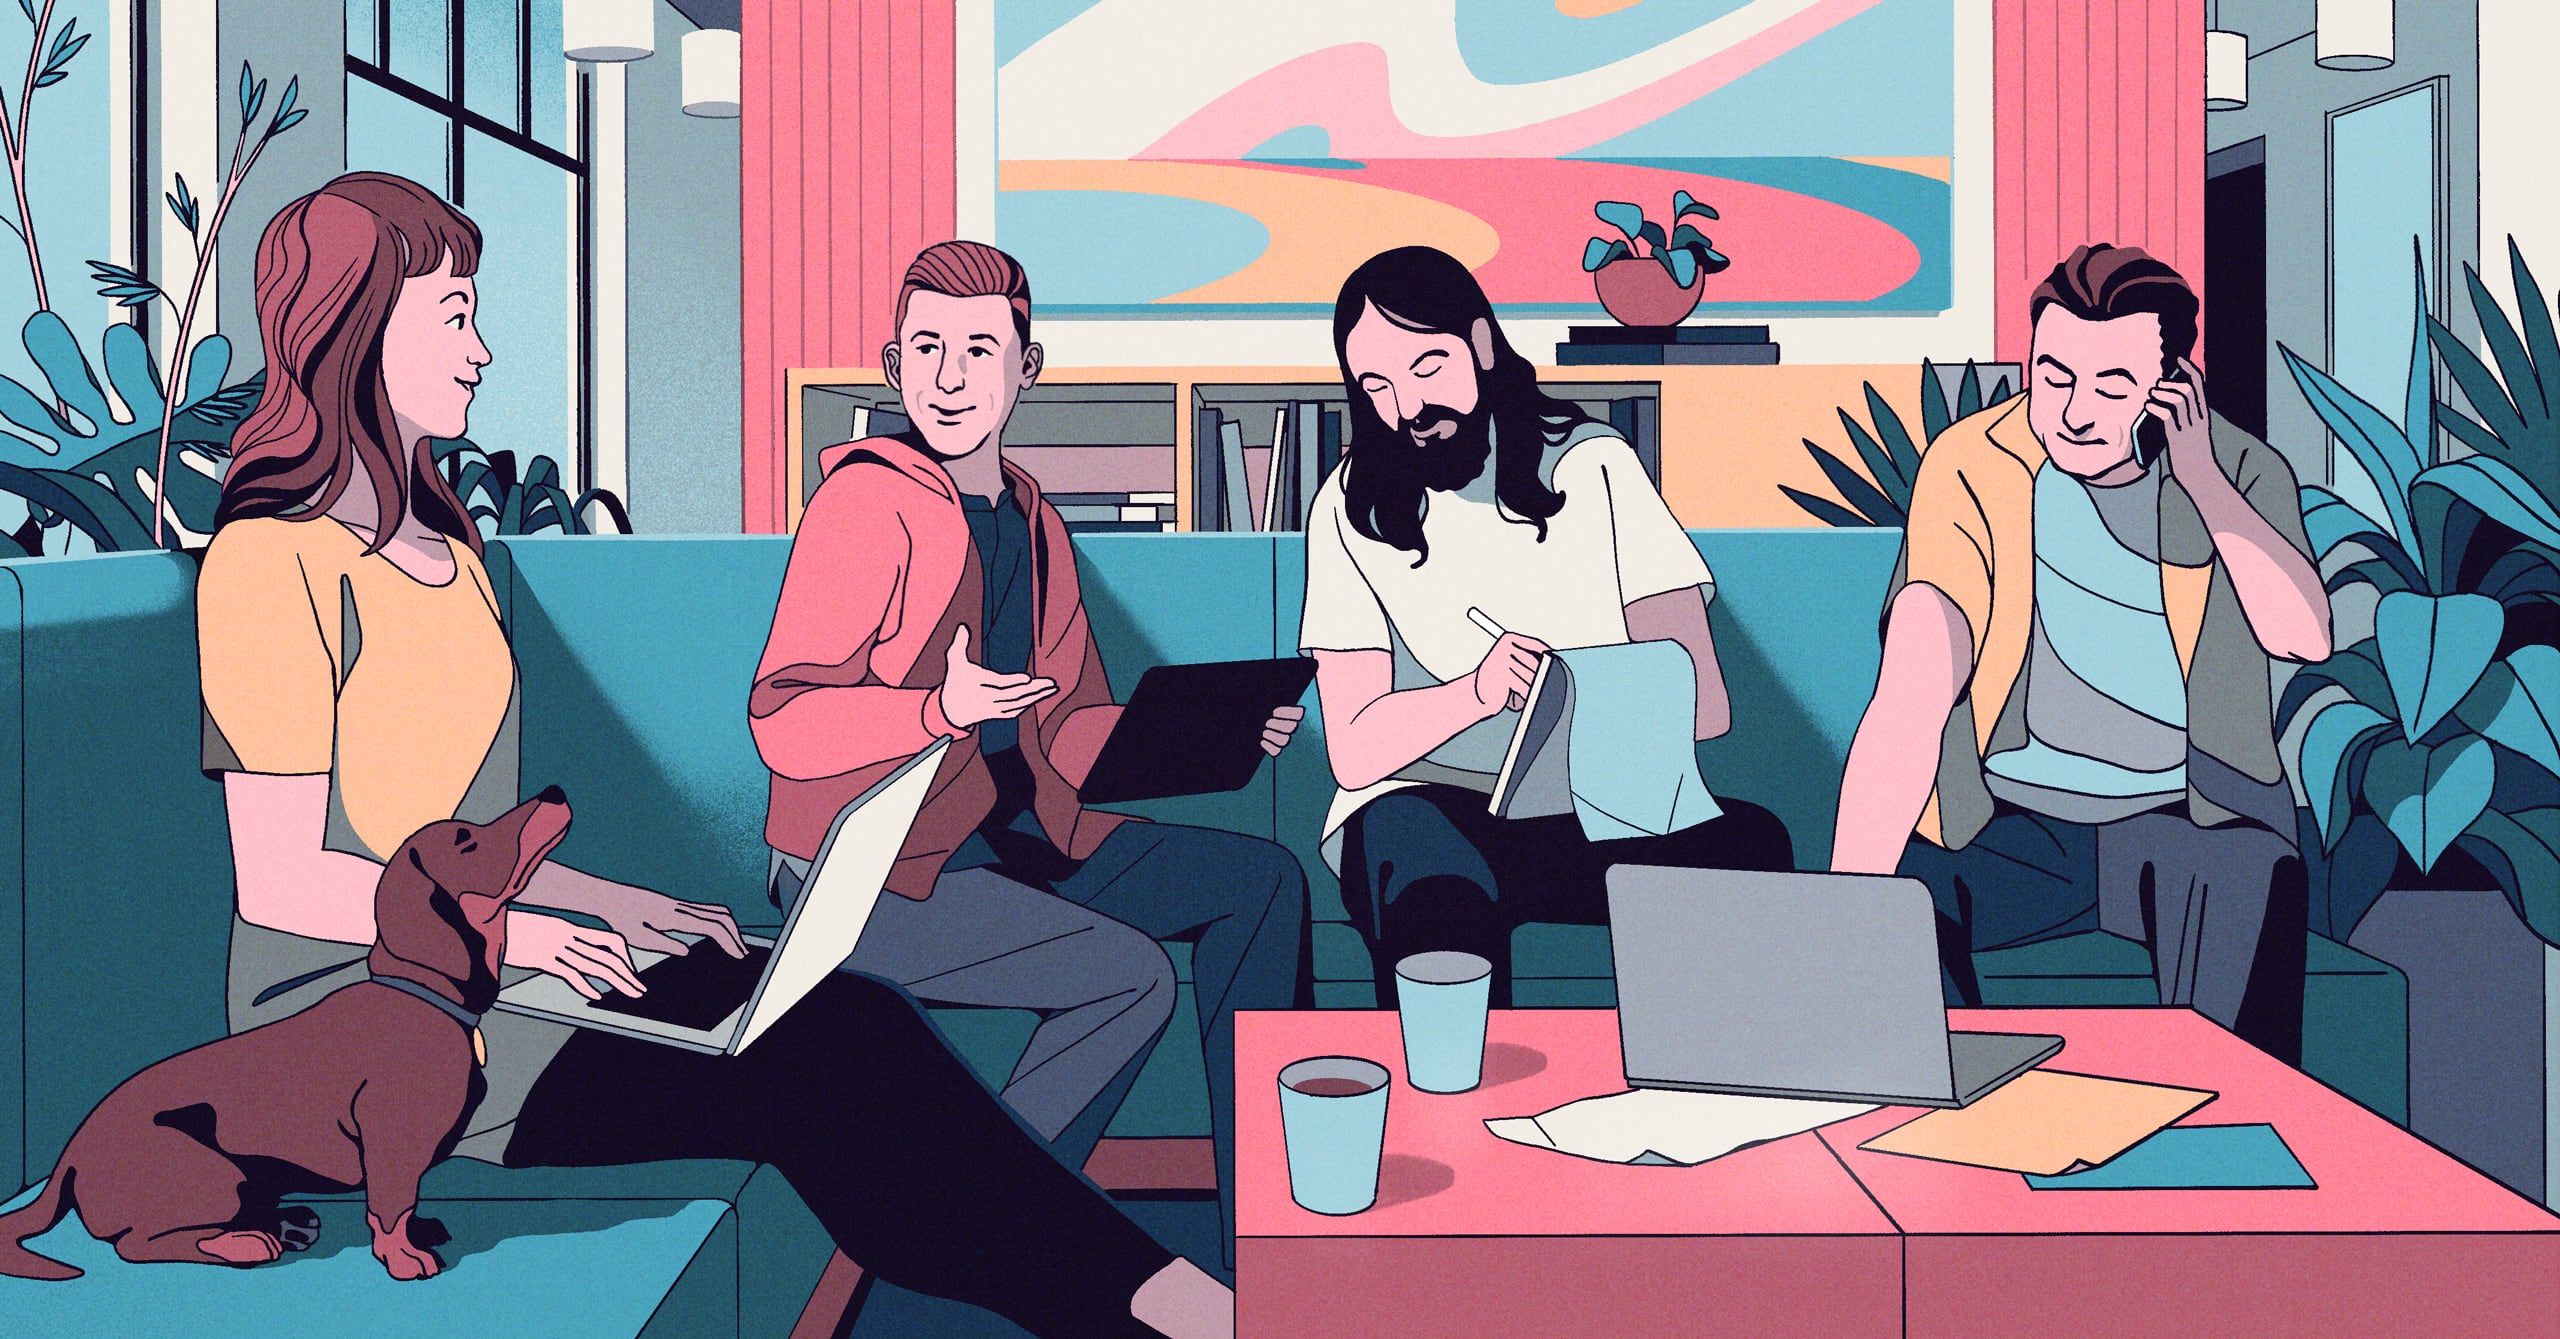 Illustration of Handsome Frank team members discussing on couch